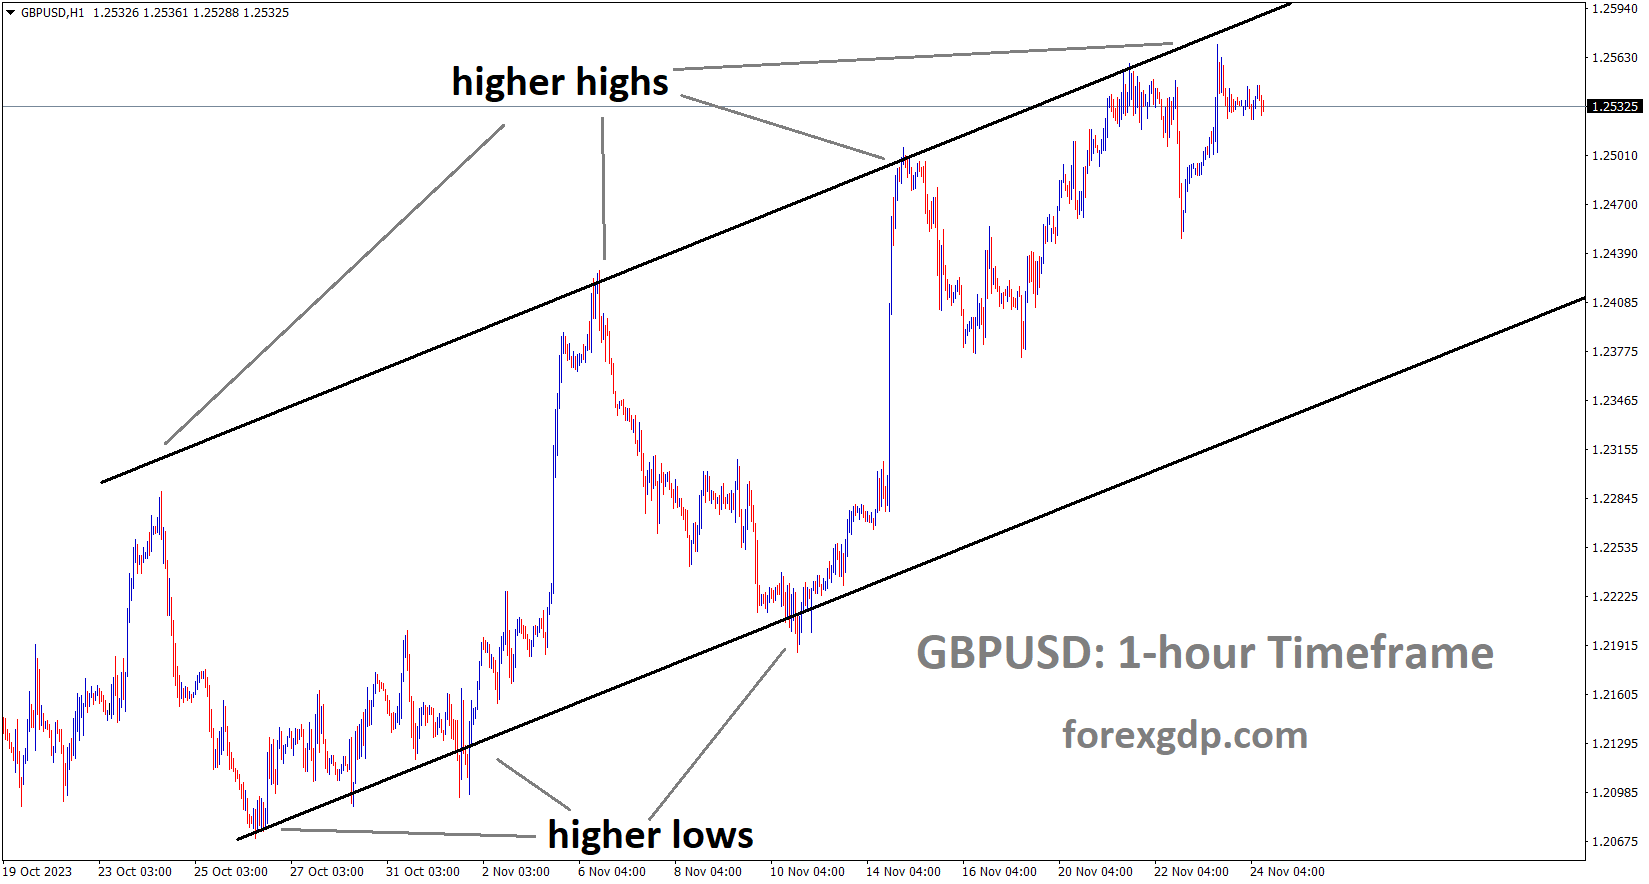 GBPUSD is moving in an Ascending channel and the market has fallen from the higher high area of the channel